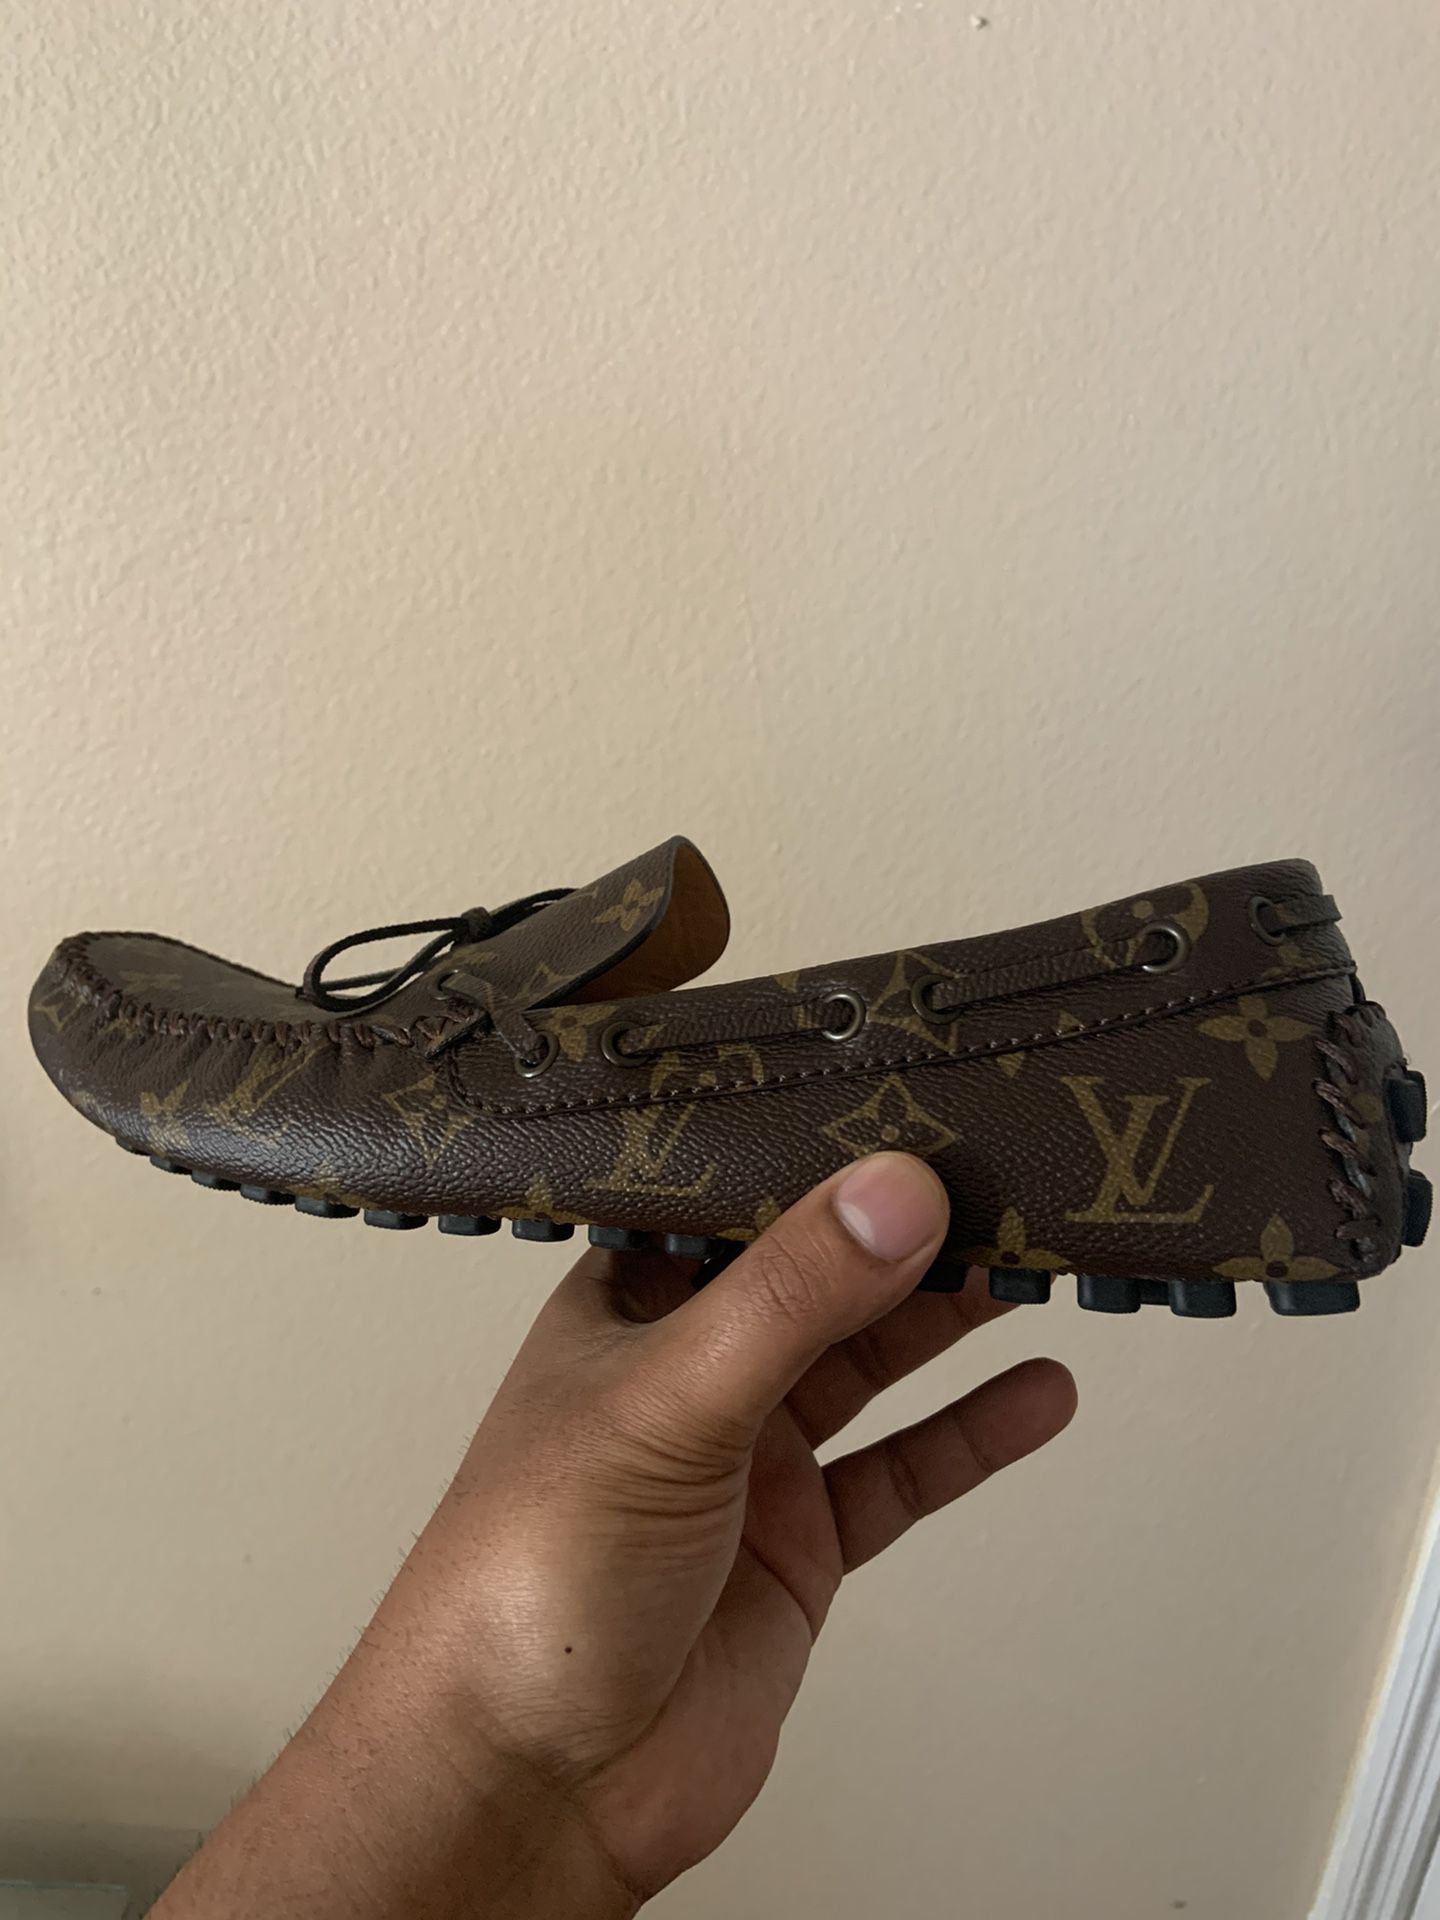 New Men’s Louis Vuitton Black Slip On Loafers Shoes for Sale in Windermere,  FL - OfferUp